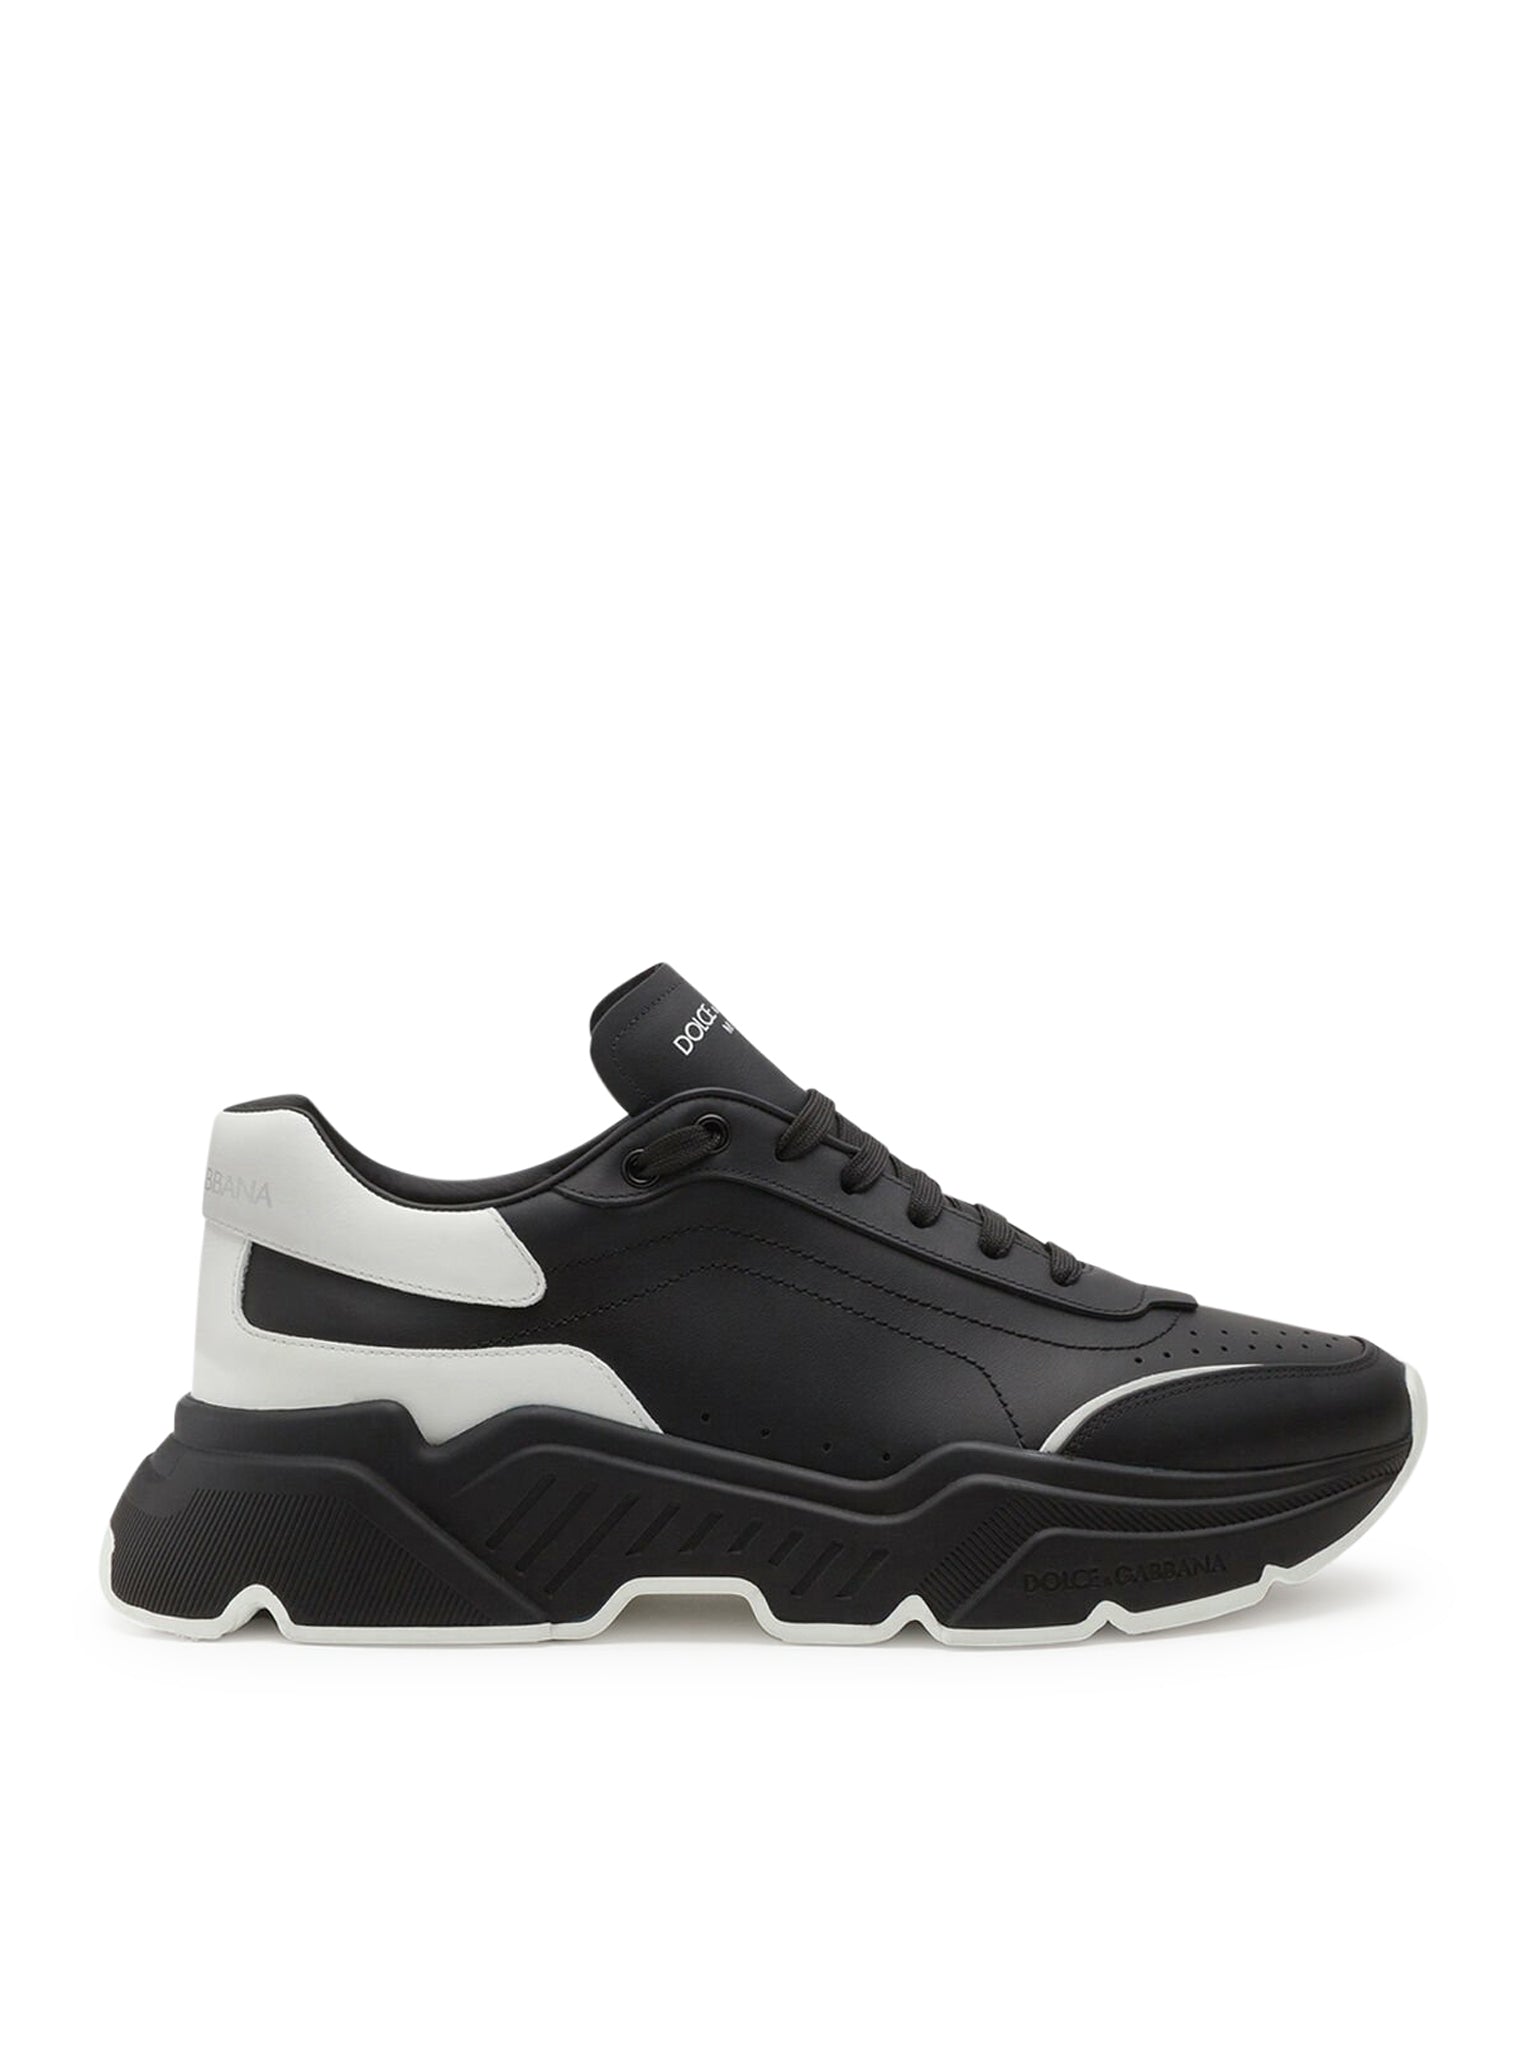 DOLCE & GABBANA DAY MASTER TWO-TONE LEATHER SNEAKERS